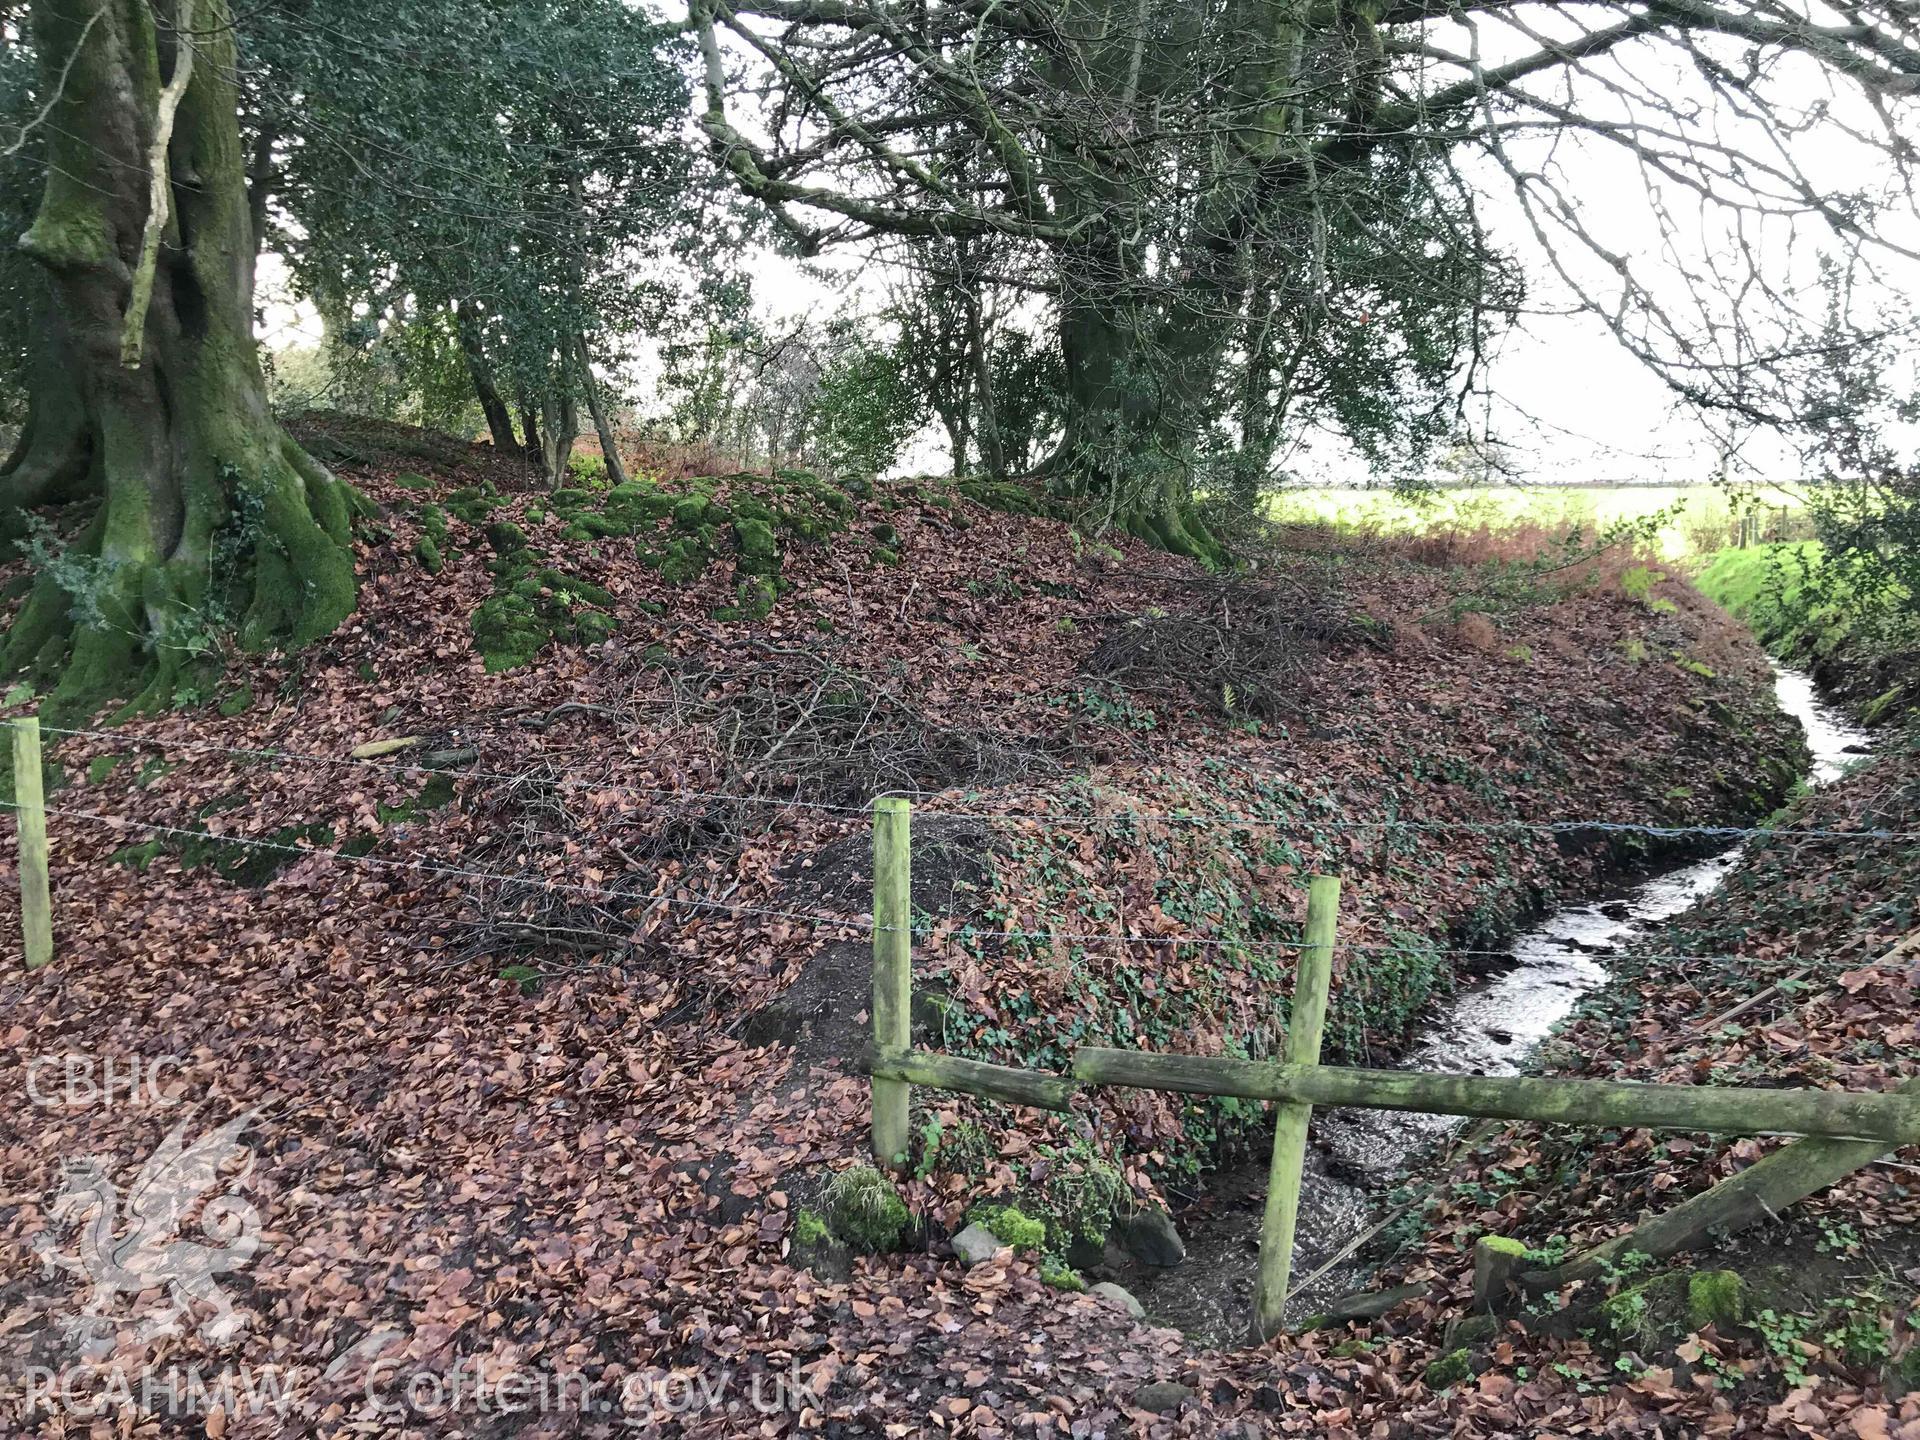 Digital photograph of outer ditch at Cas Troggy Castle, produced by Paul Davis in 2020